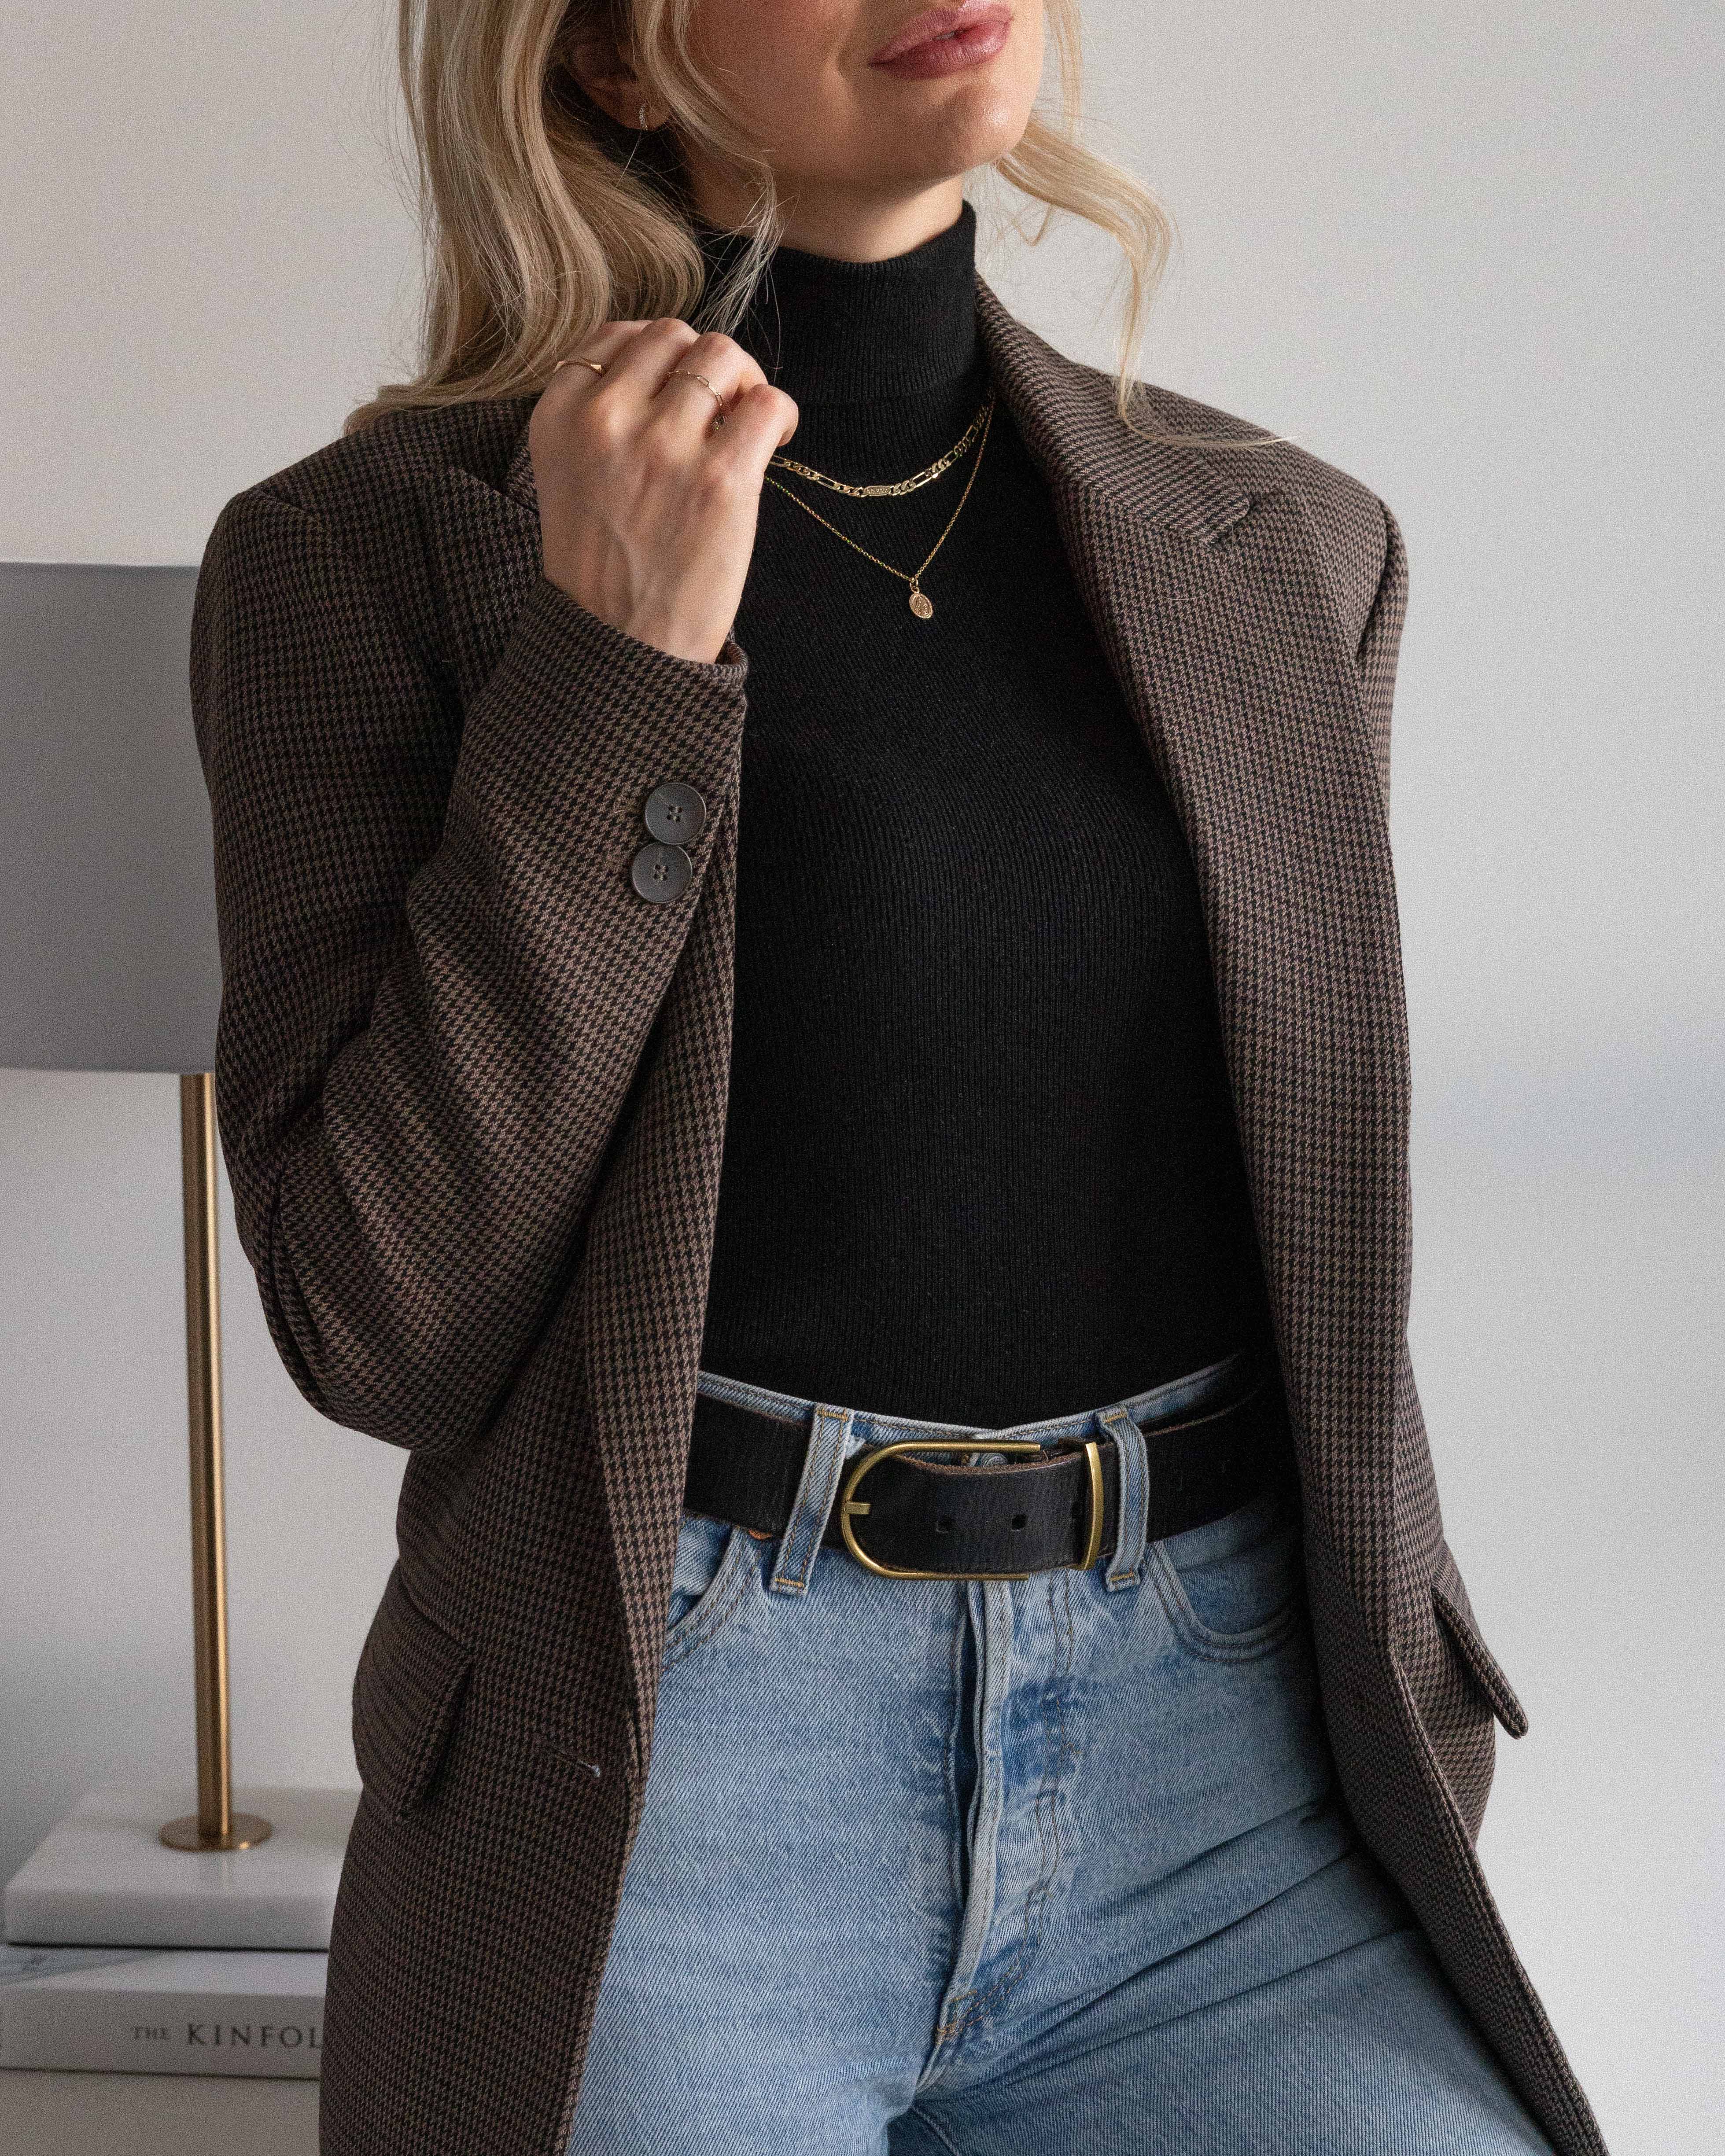 https://www.alexgaboury.com/wp-content/uploads/2020/11/Fall-Outfit.jpg